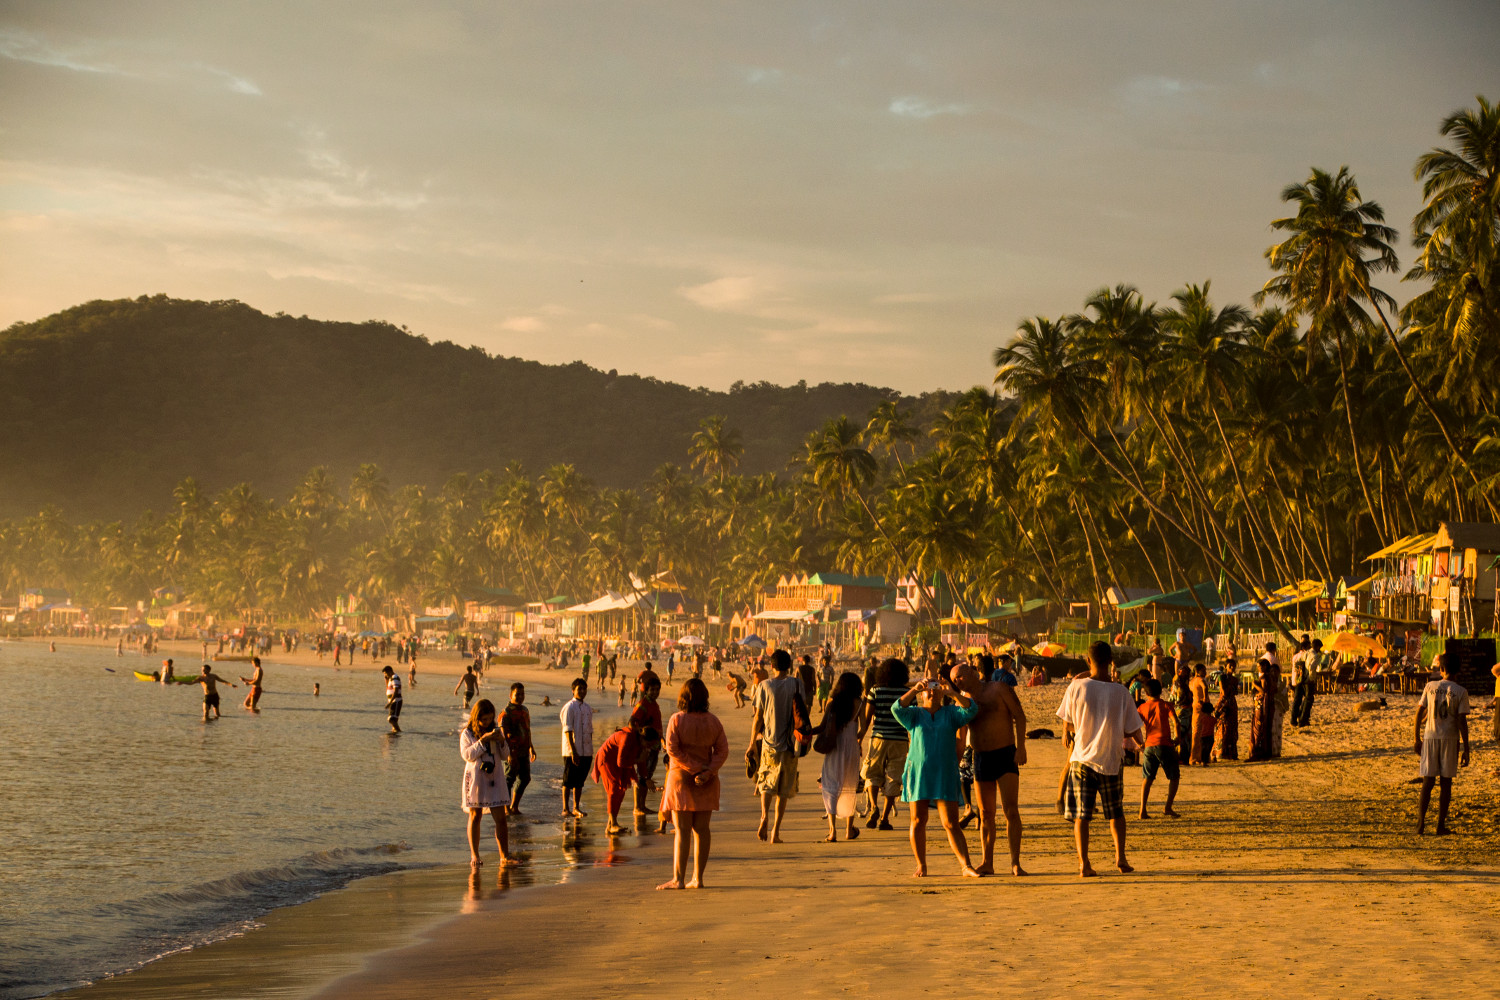 Travellers on Palolem Beach, Goa. Image by Paul Harding / Lonely Planet